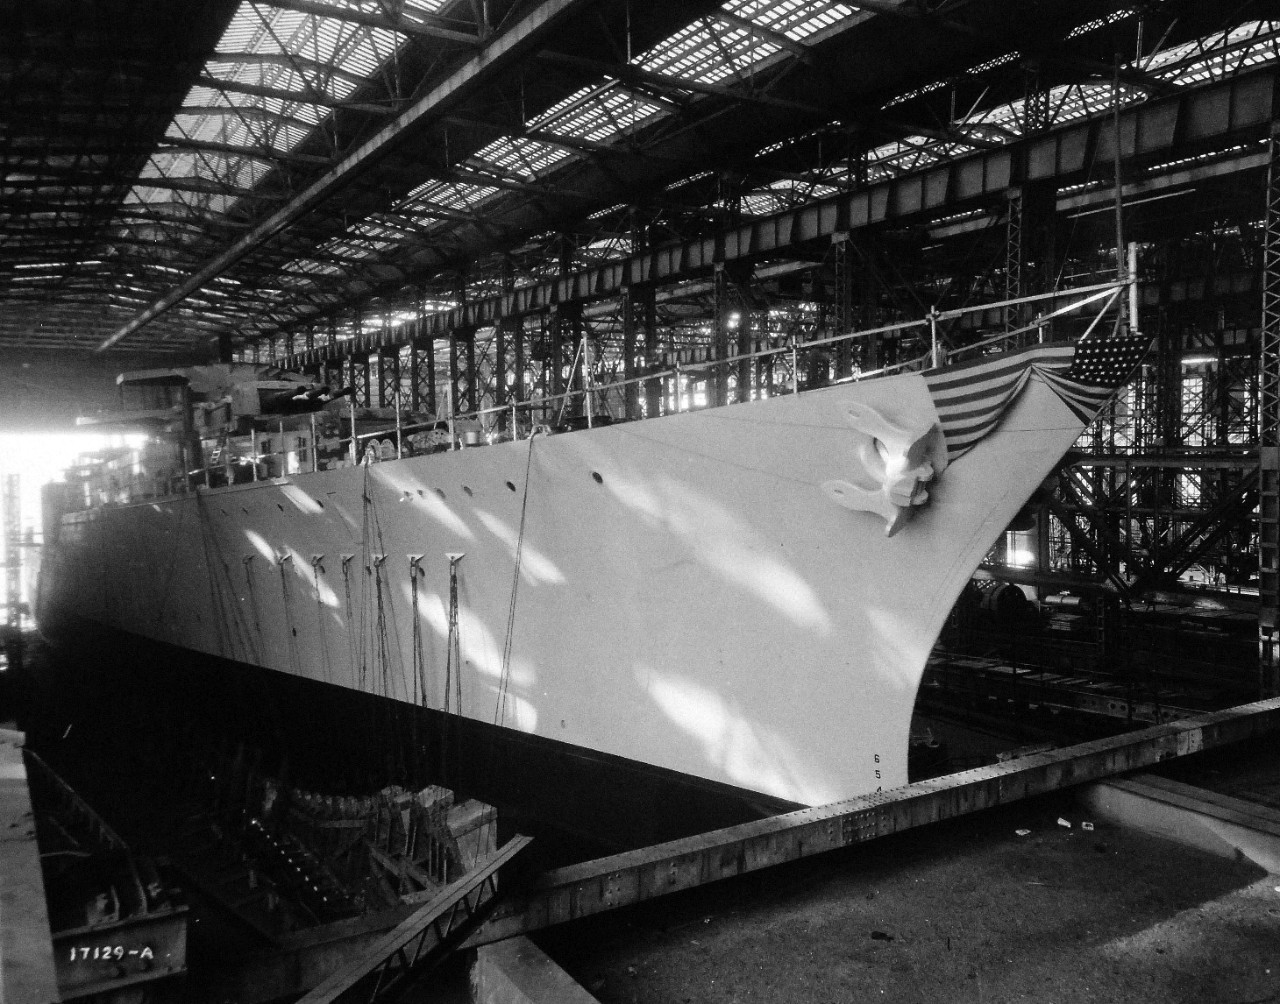 19-LC-61836a:    USS Indianapolis (CA- 35), 1931.    Starboard  view shown during launching at the New York Shipbuilding Corporation, November 7, 1931.   Indianapolis was commissioned on November 15, 1932 and was later sunk during World War II by Japanese submarine I-58 on July 30, 1945.   Official U.S. Navy Photograph, now in the collections of the National Archives.   (2015/2/3).   